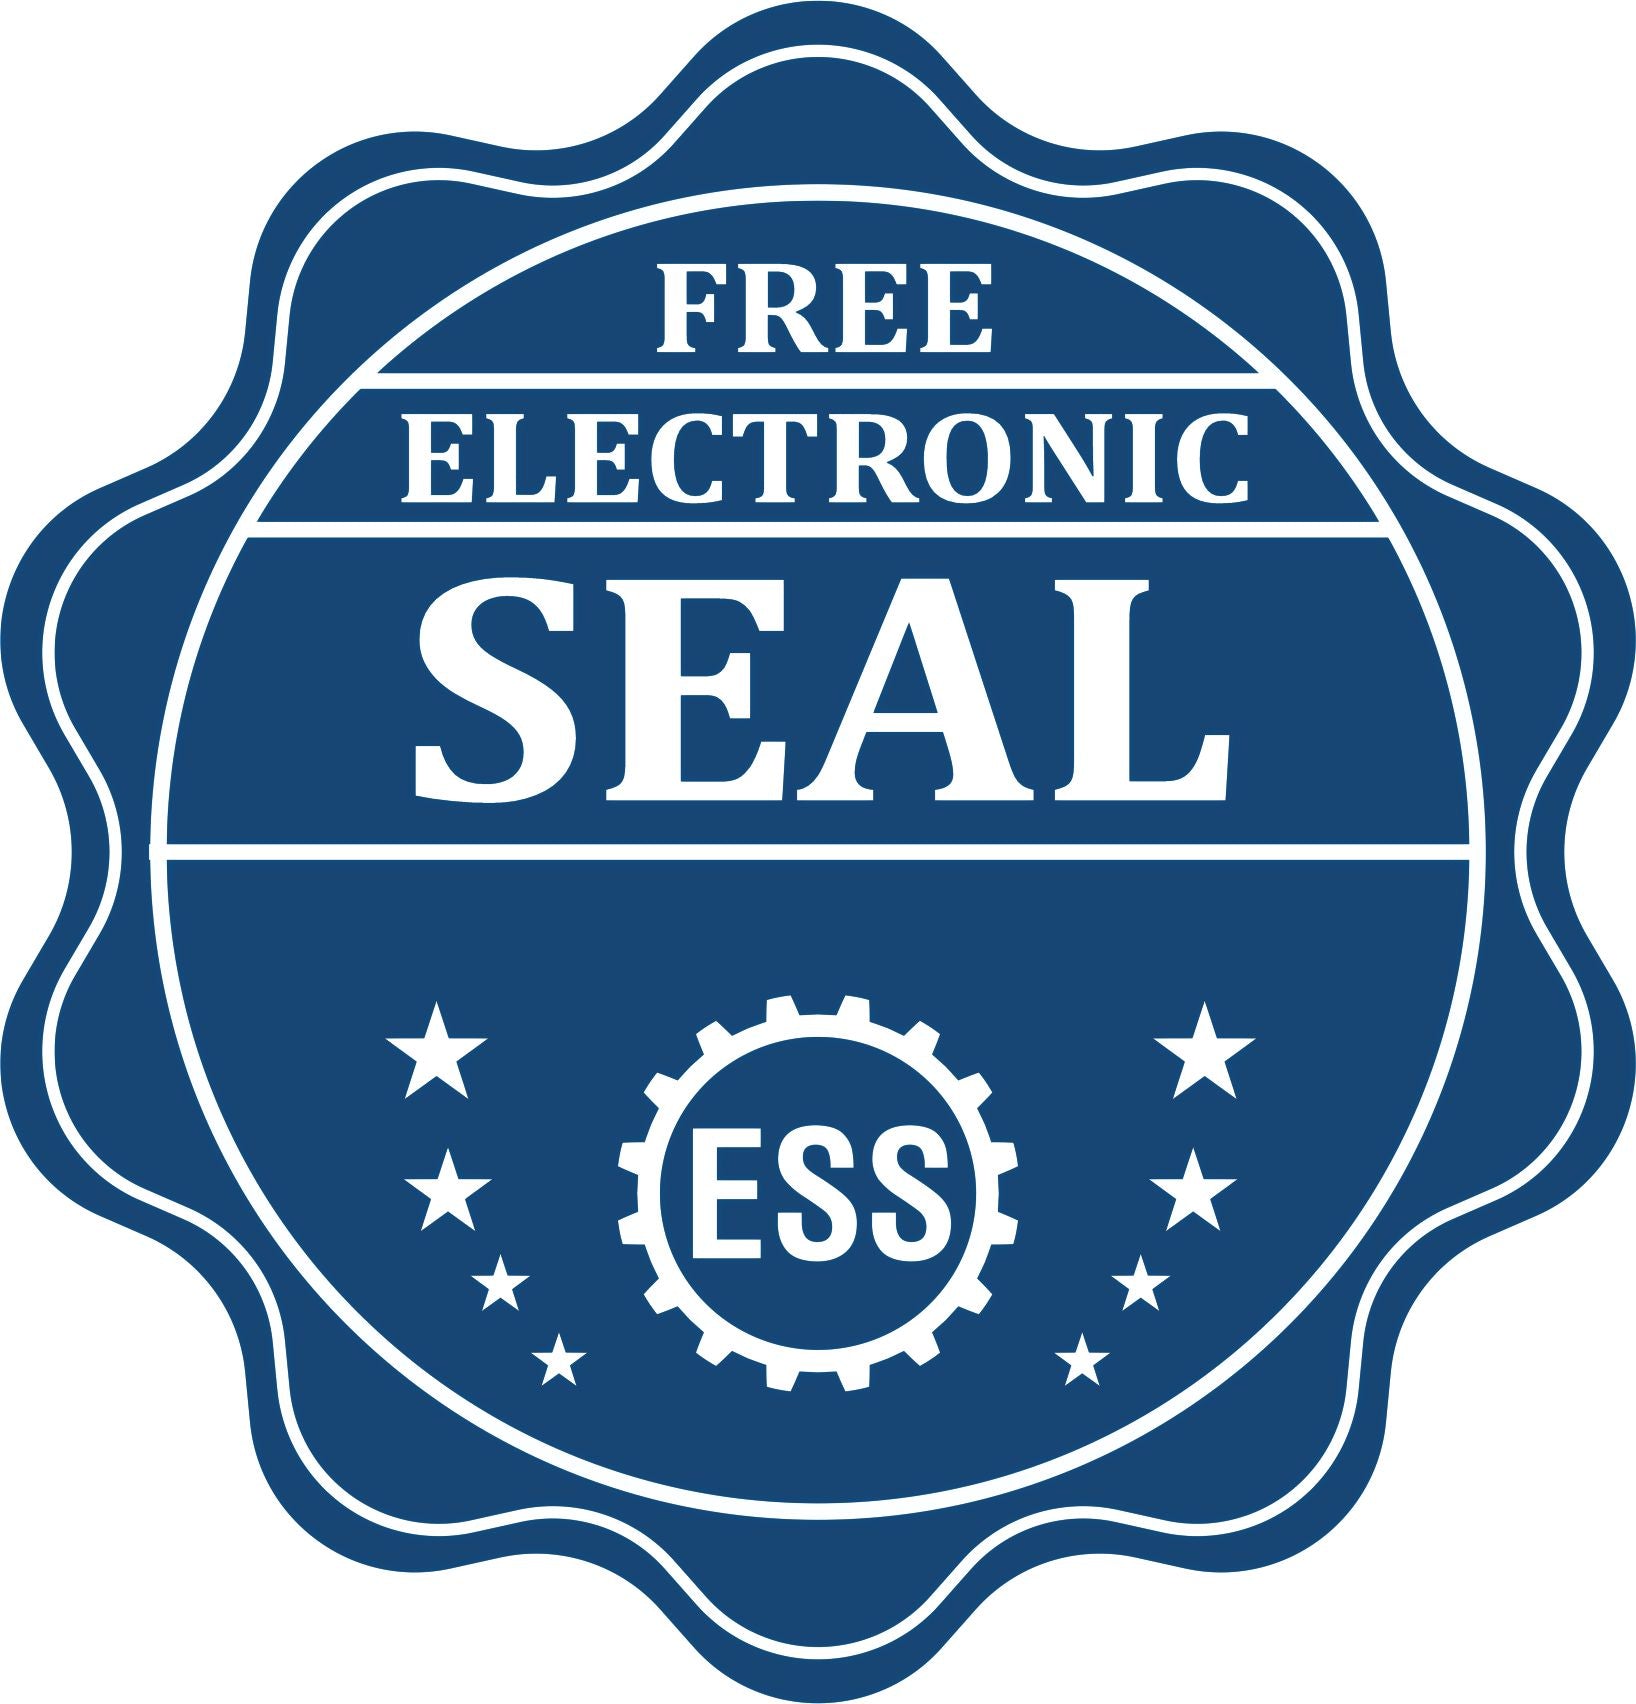 A badge showing a free electronic seal for the Long Reach New York PE Seal with stars and the ESS gear on the emblem.